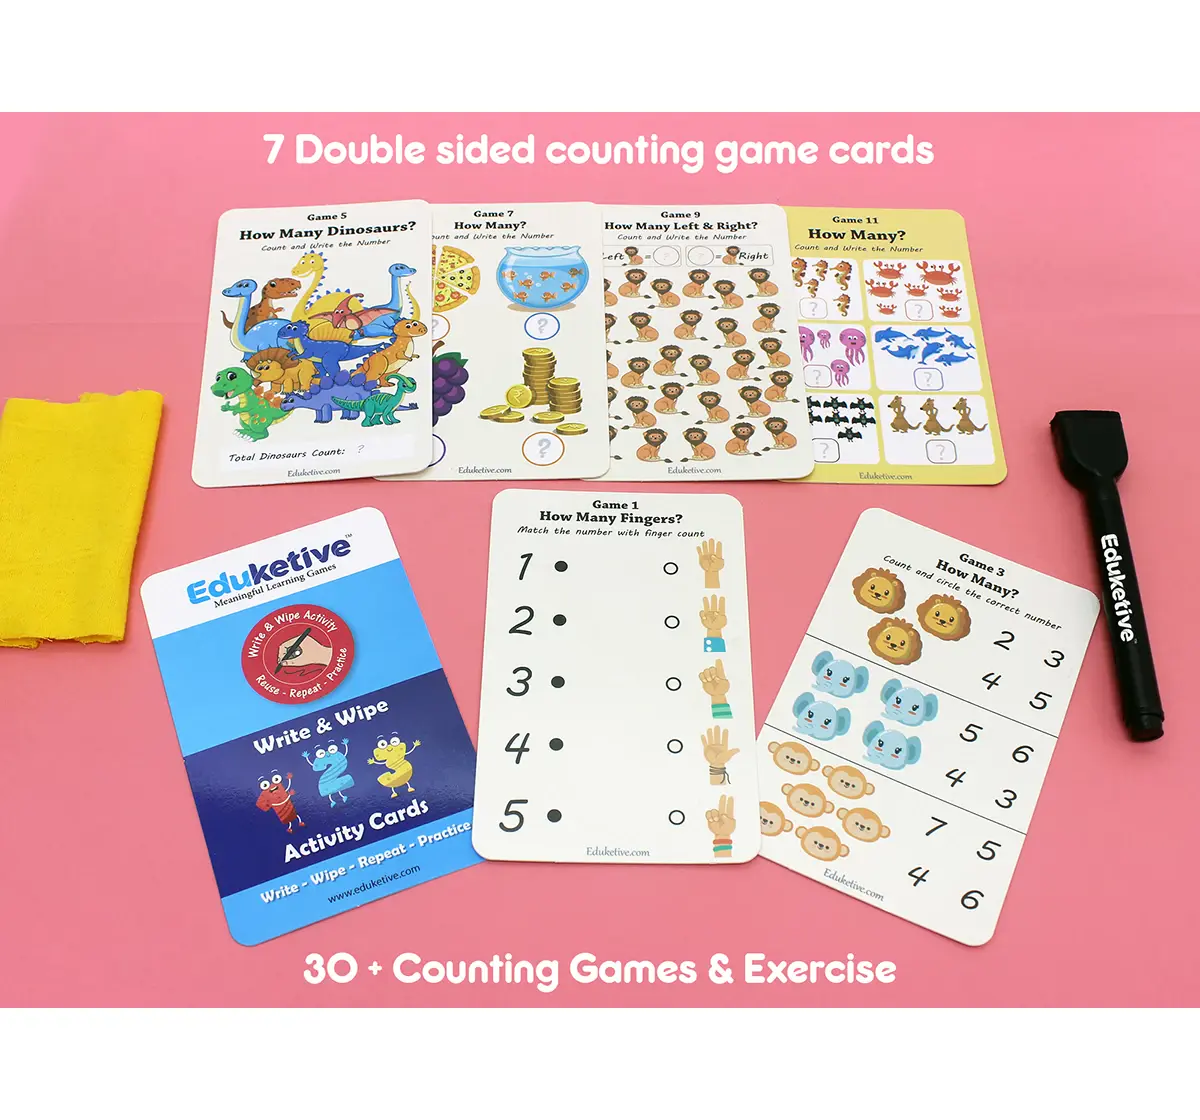 Eduketive 123 Numbers & Counting Write & Wipe Reusable Activity 3-6 yrs Writing Practice Preschool Learning Educational Game with Exercise Book